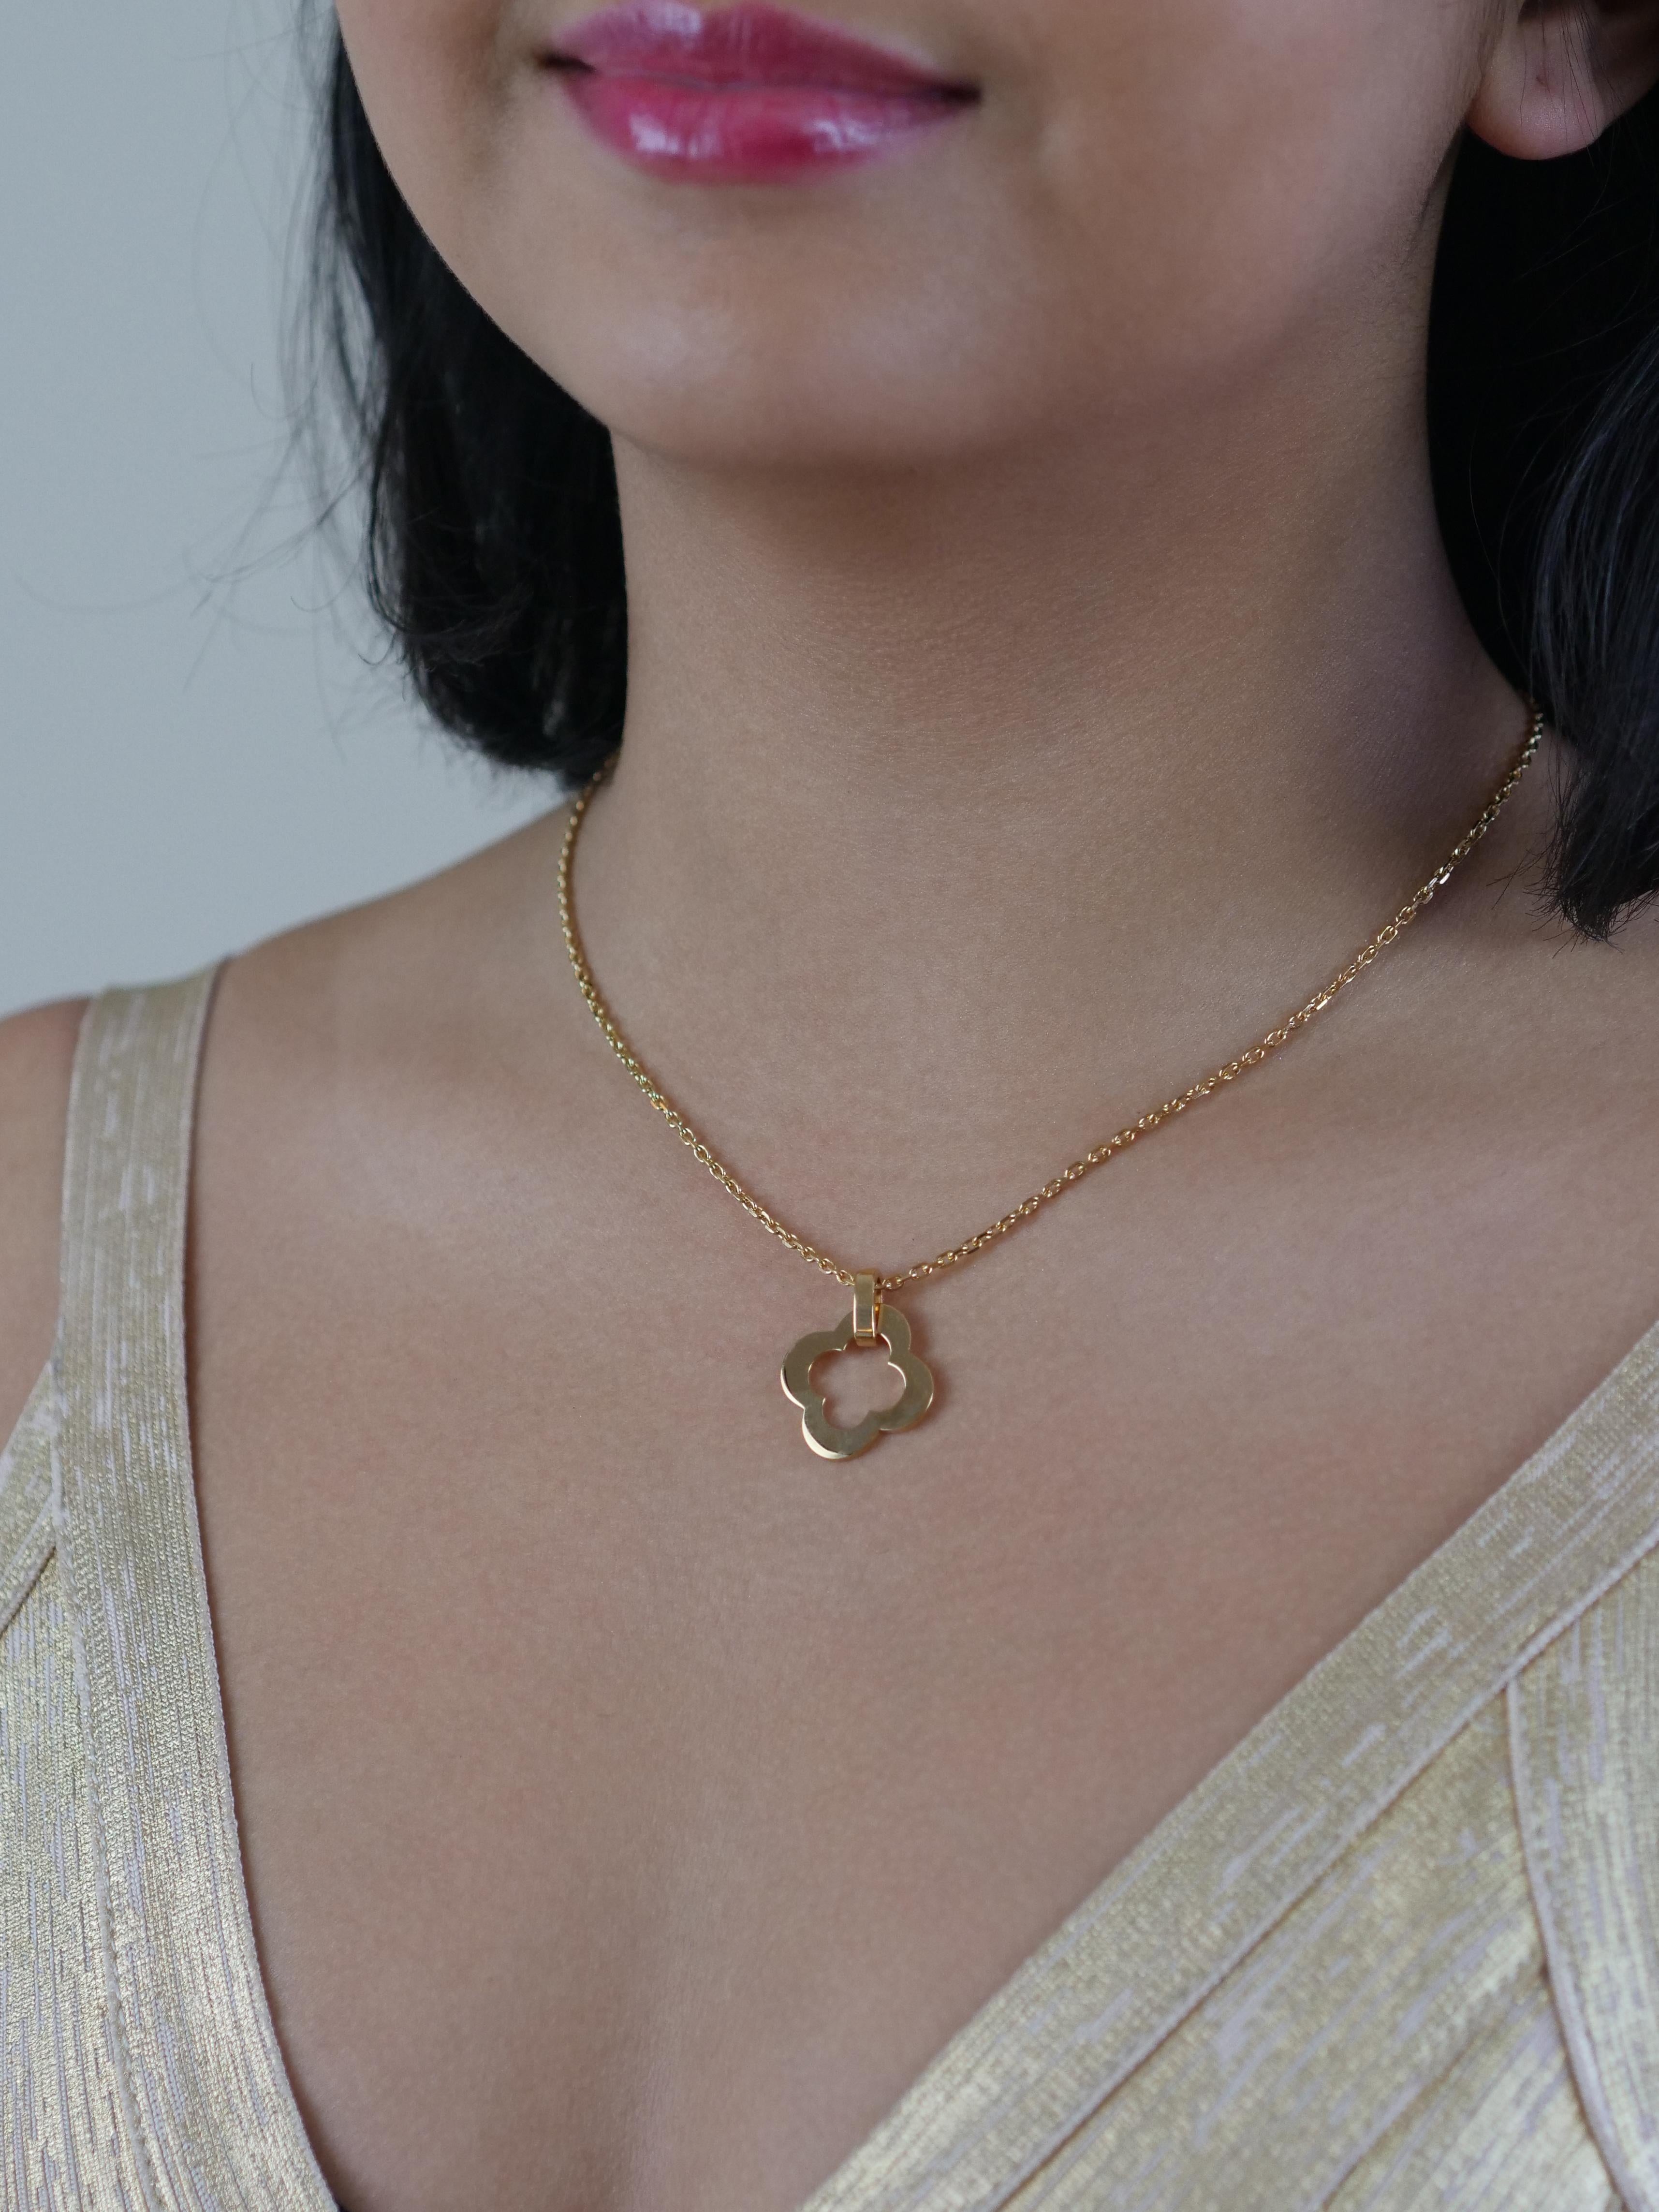 Van Cleef & Arpels is a French luxury jewelry brand, with elegance and subtlety, the Byzantine Alhambra® jewelry collection has paid homage to the iconic symbol in its purest form since 2006. Inspired by the clover leaf, these Van Cleef & Arpels